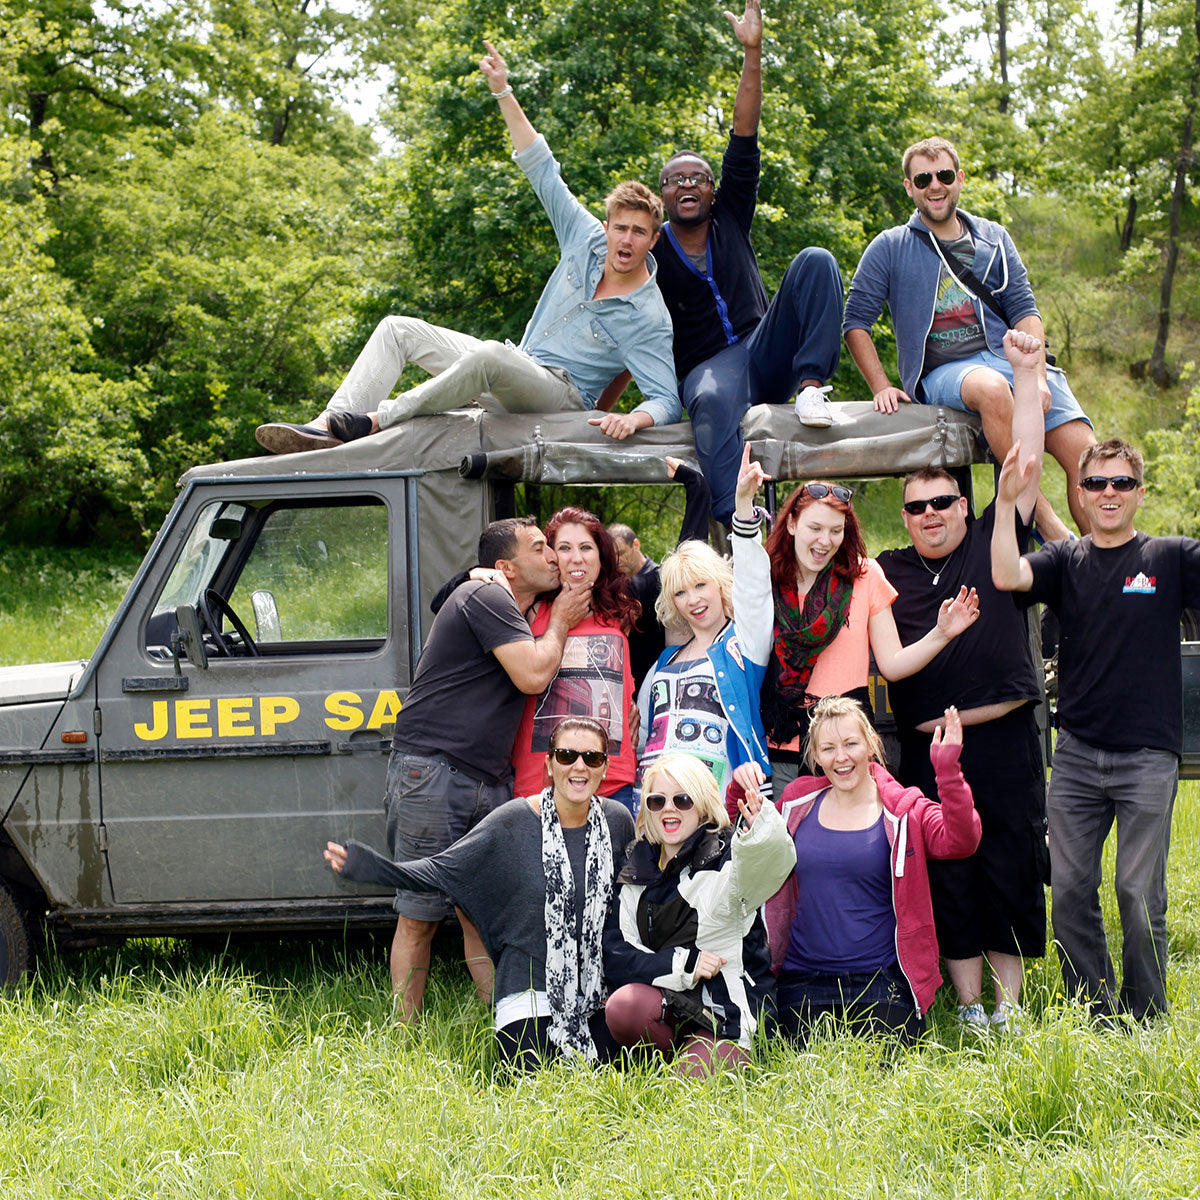 Jeep safari adventure - Off-road driving, shooting, lunch and more surprises. Sunny Beach